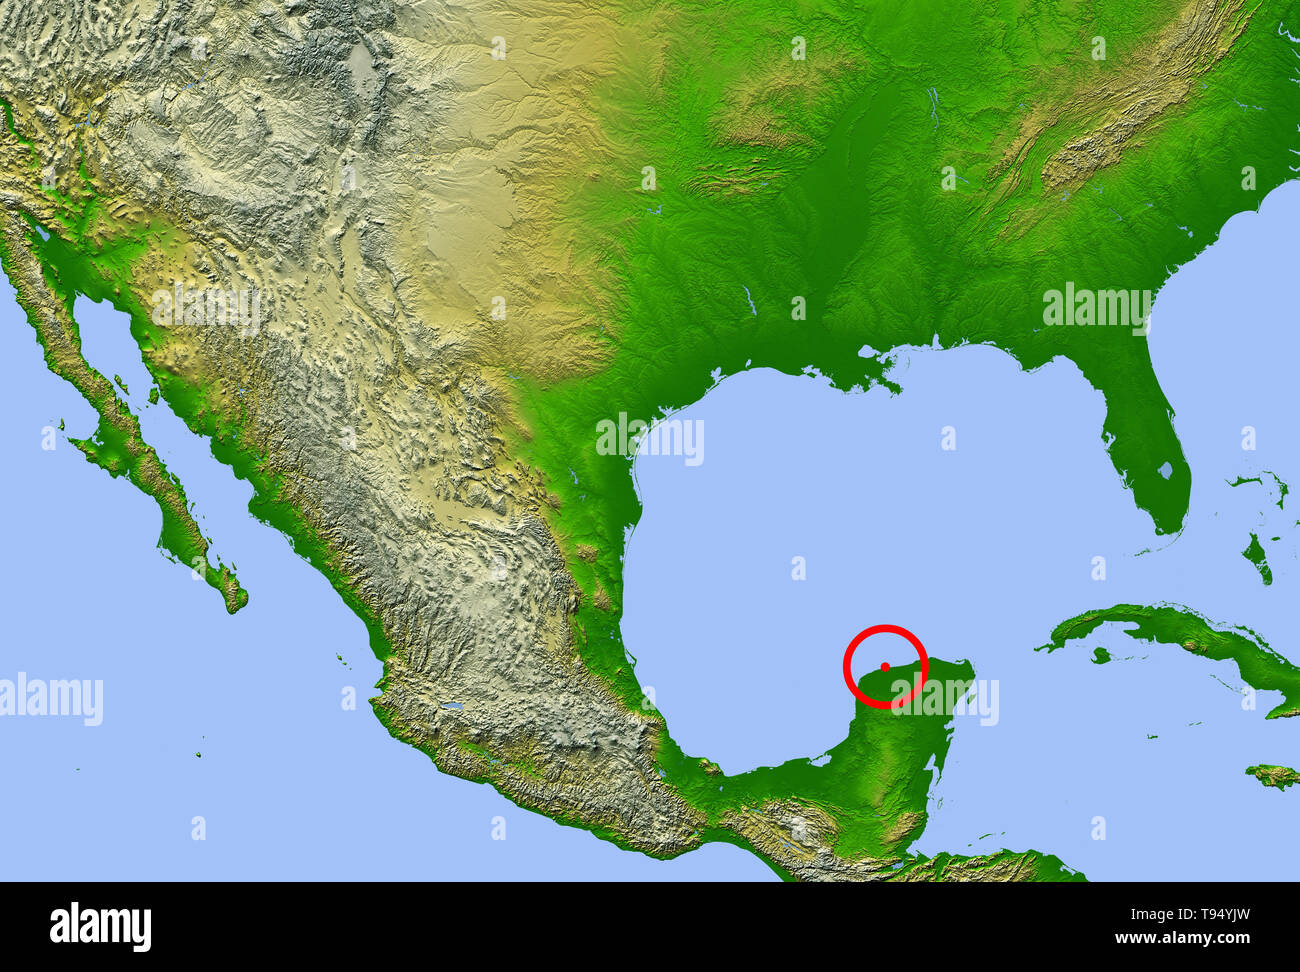 Chicxulub crater. Map showing the location of the Chicxulub impact crater (center) on the Yucatan Peninsula, Mexico. This impact may have caused the extinction of the dinosaurs and 70% of all Earth's species 65 million years ago. The four red dots represent the cities of (from left to right): Mexico City, Tempico (where material ejected from the crater has been found), Havana and Miami. Stock Photo